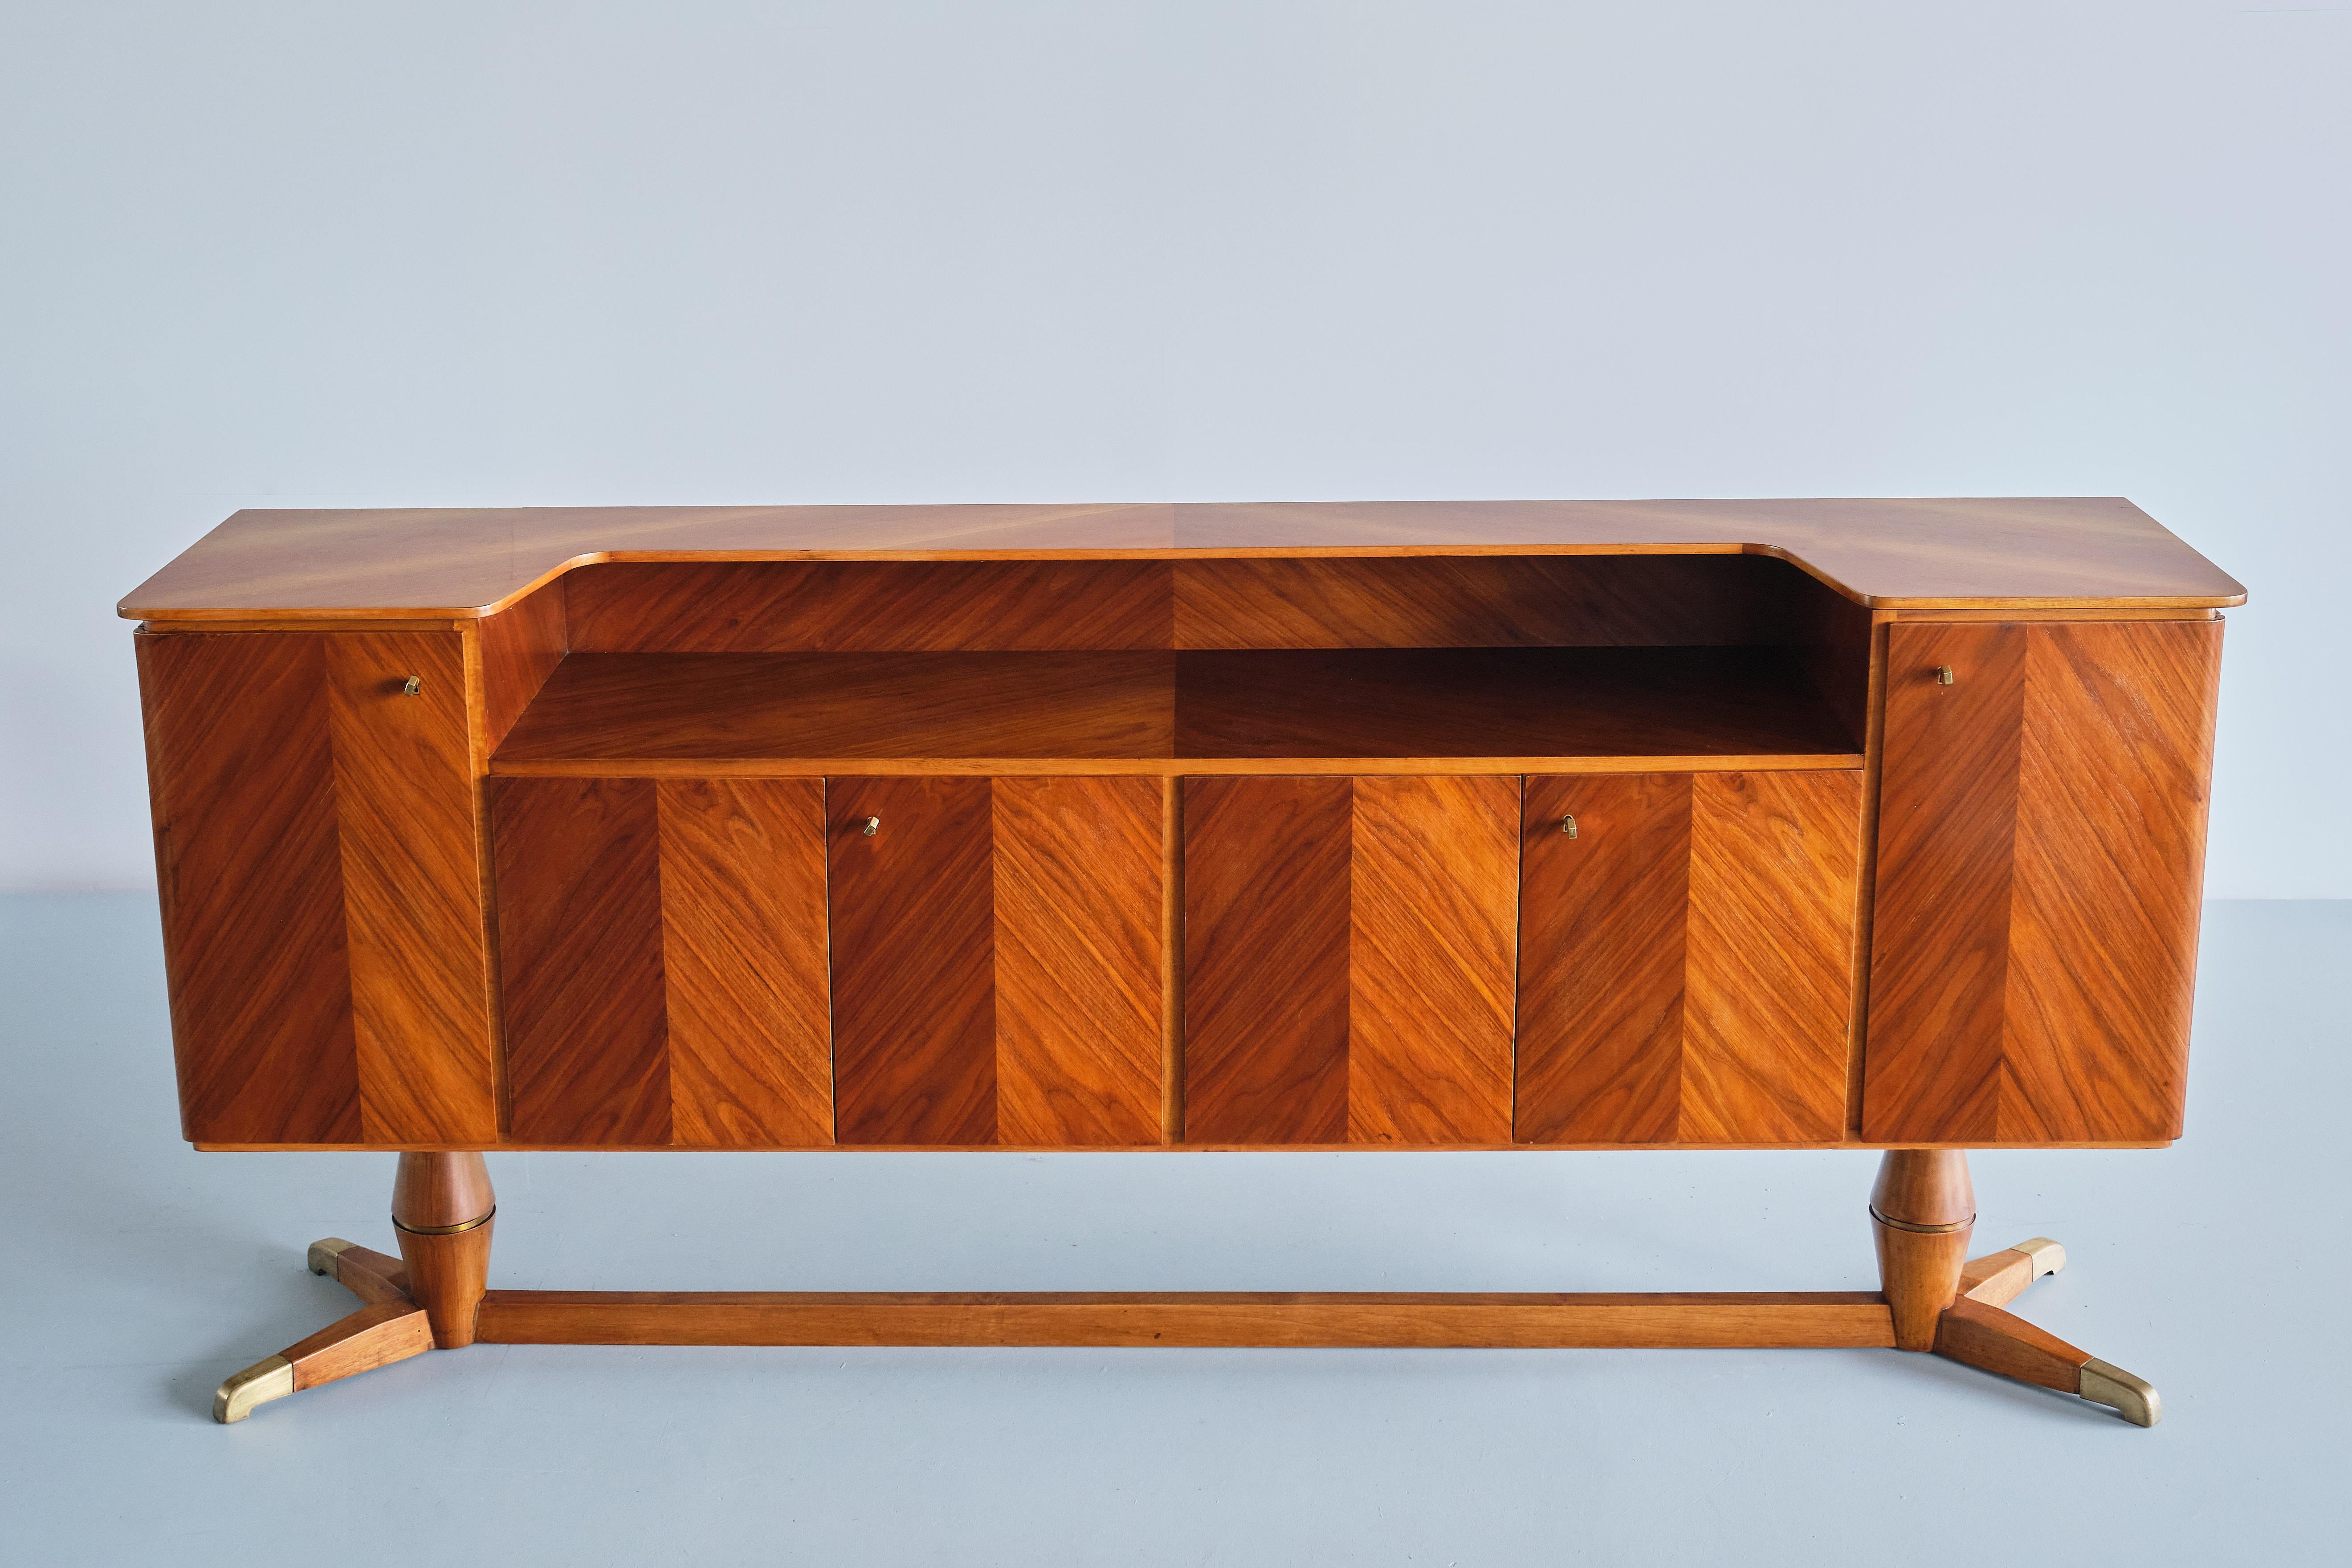 Paolo Buffa Attributed Sideboard in Walnut and Brass, Serafino Arrighi, 1940s For Sale 4